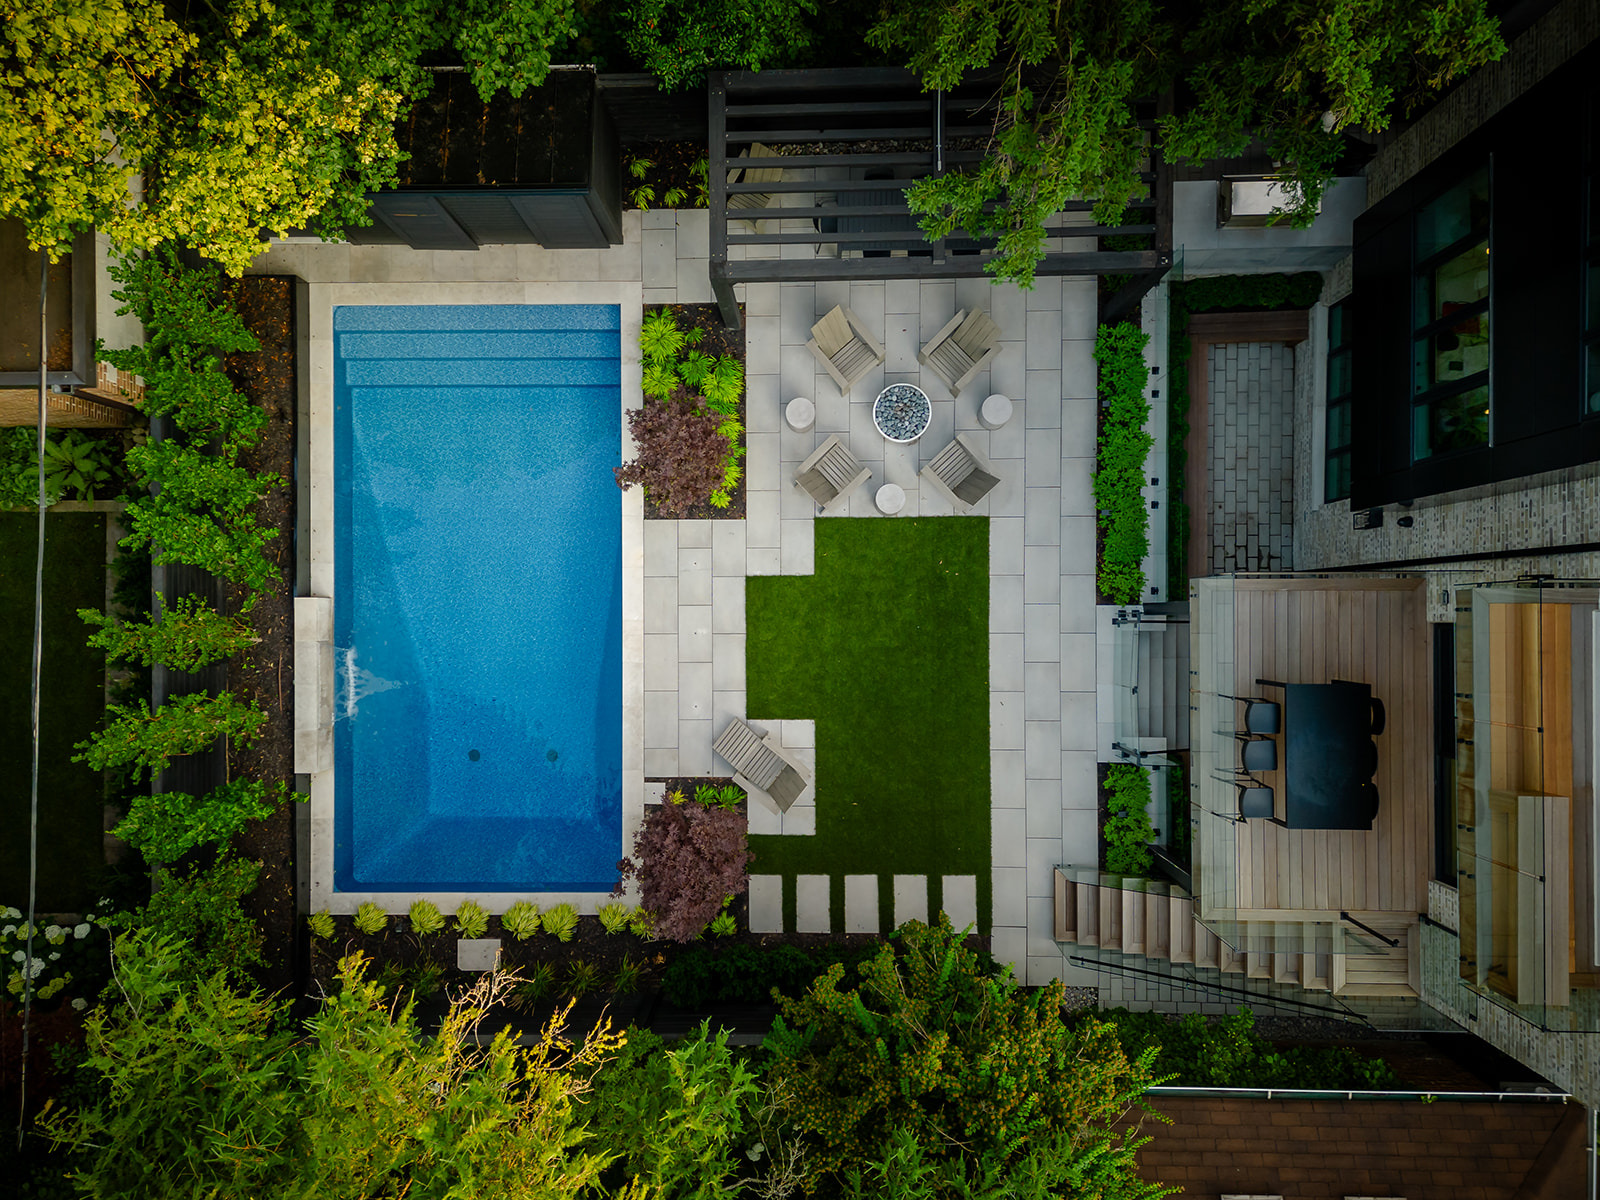 Top-down view of the backyard.